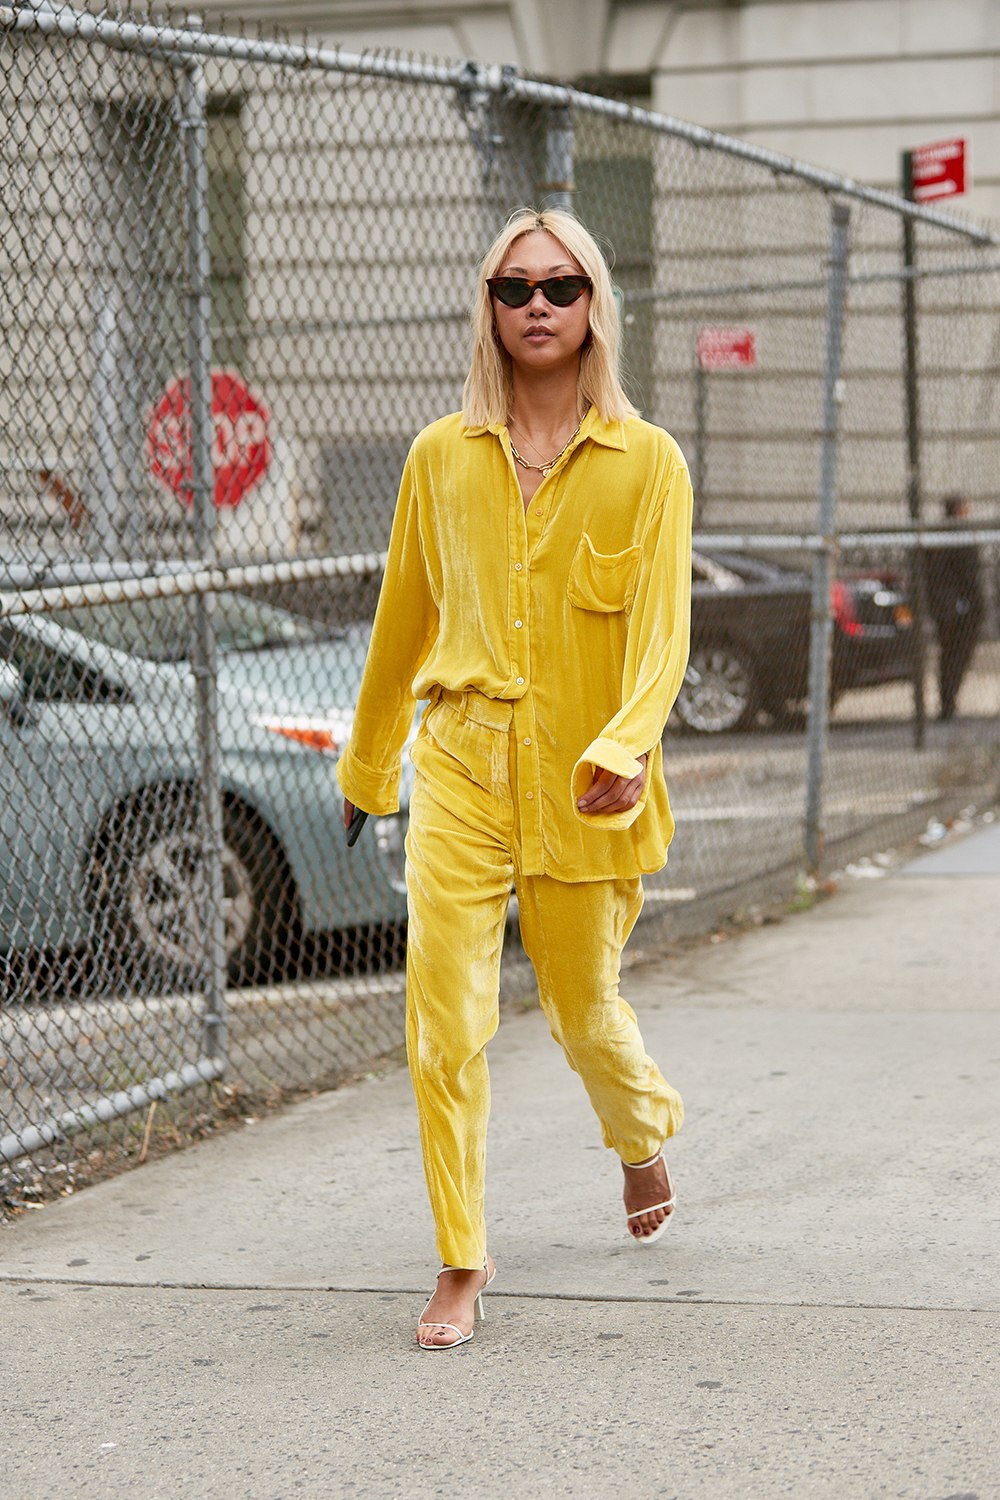 The Latest Street Style From New York Fashion Week | Who What Wear